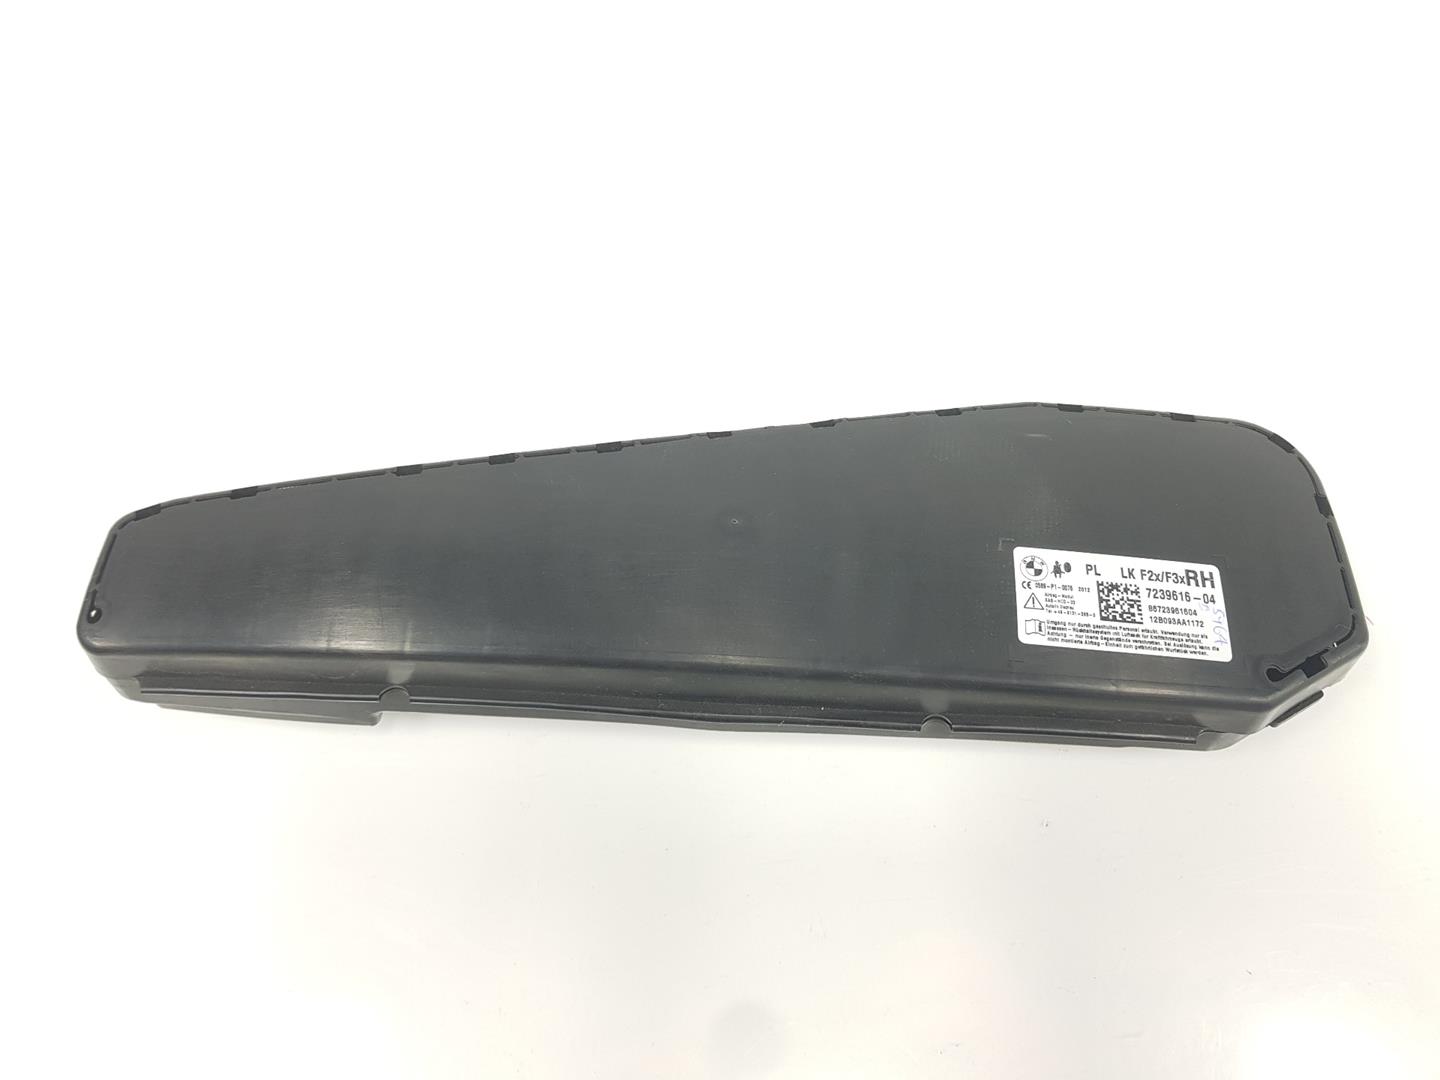 BMW 1 Series F20/F21 (2011-2020) Front Right Door Airbag SRS 7239616, 72127239616 24386959